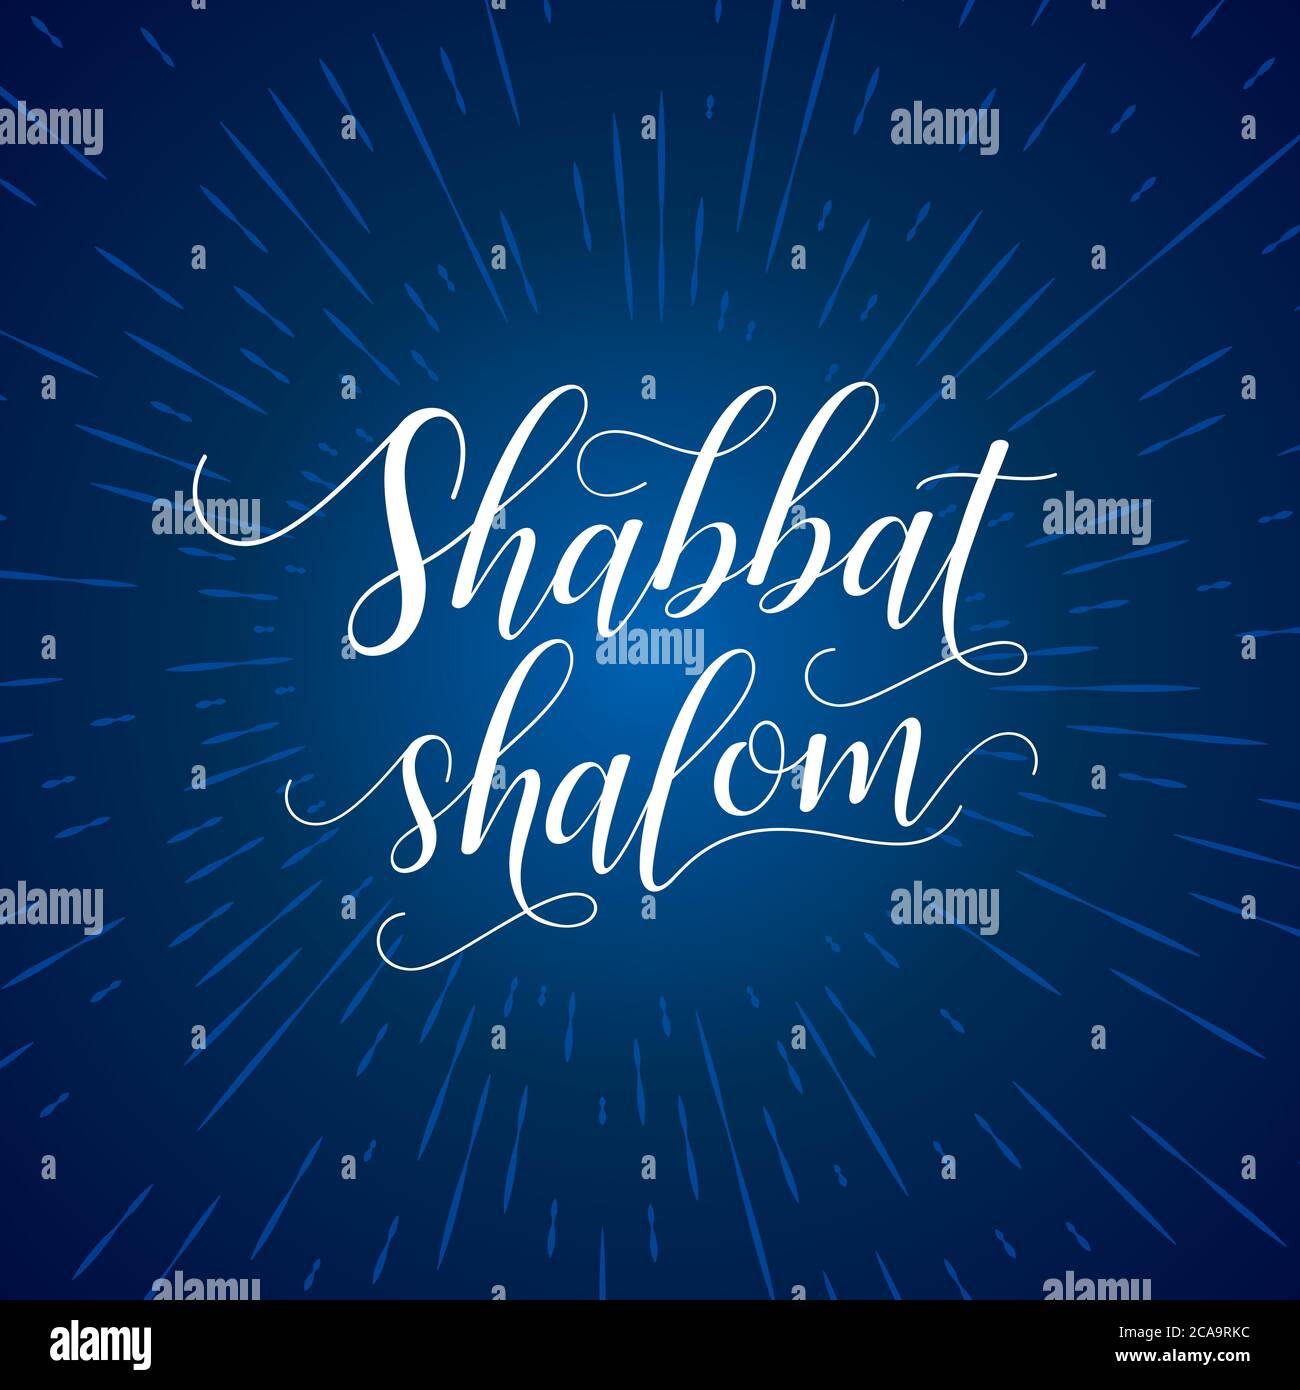 Shalom Hebrew Word Meaning Peace Flag Stock Vector (Royalty Free